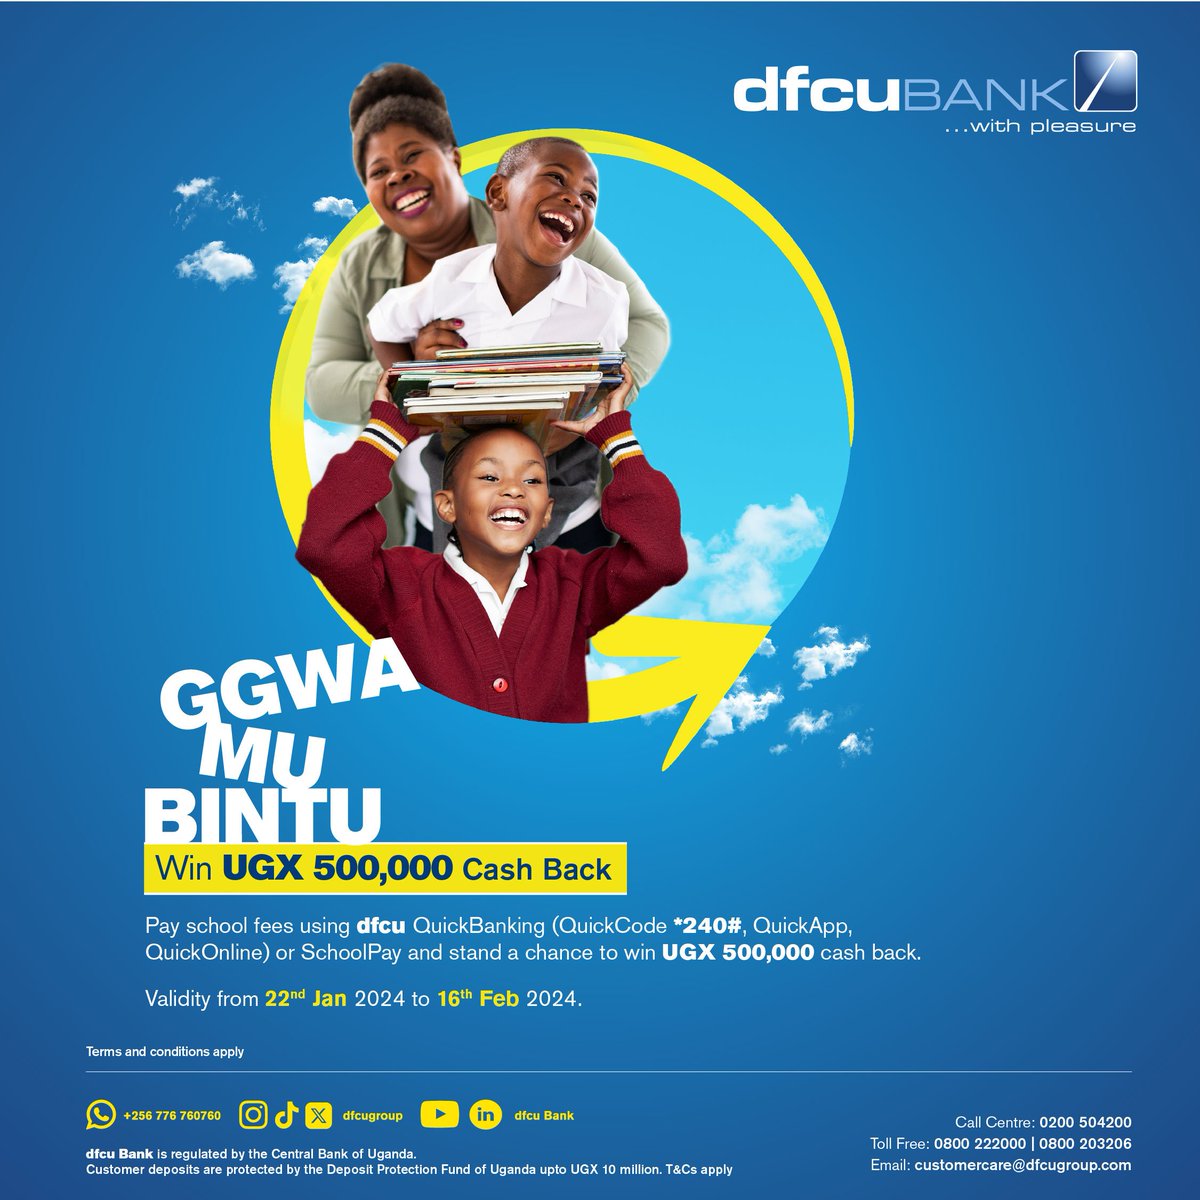 #AD: Dive into a world of endless deals during this back to school period.🔥🎉
Over Ugx 500,000/- Cash back is up for grabs to @dfcugroup customers who pay using any of the Banks digital channels.

The promo is on between 22nd Jan - 16th Feb 2023.
#TransformingLivesAndBusinesses